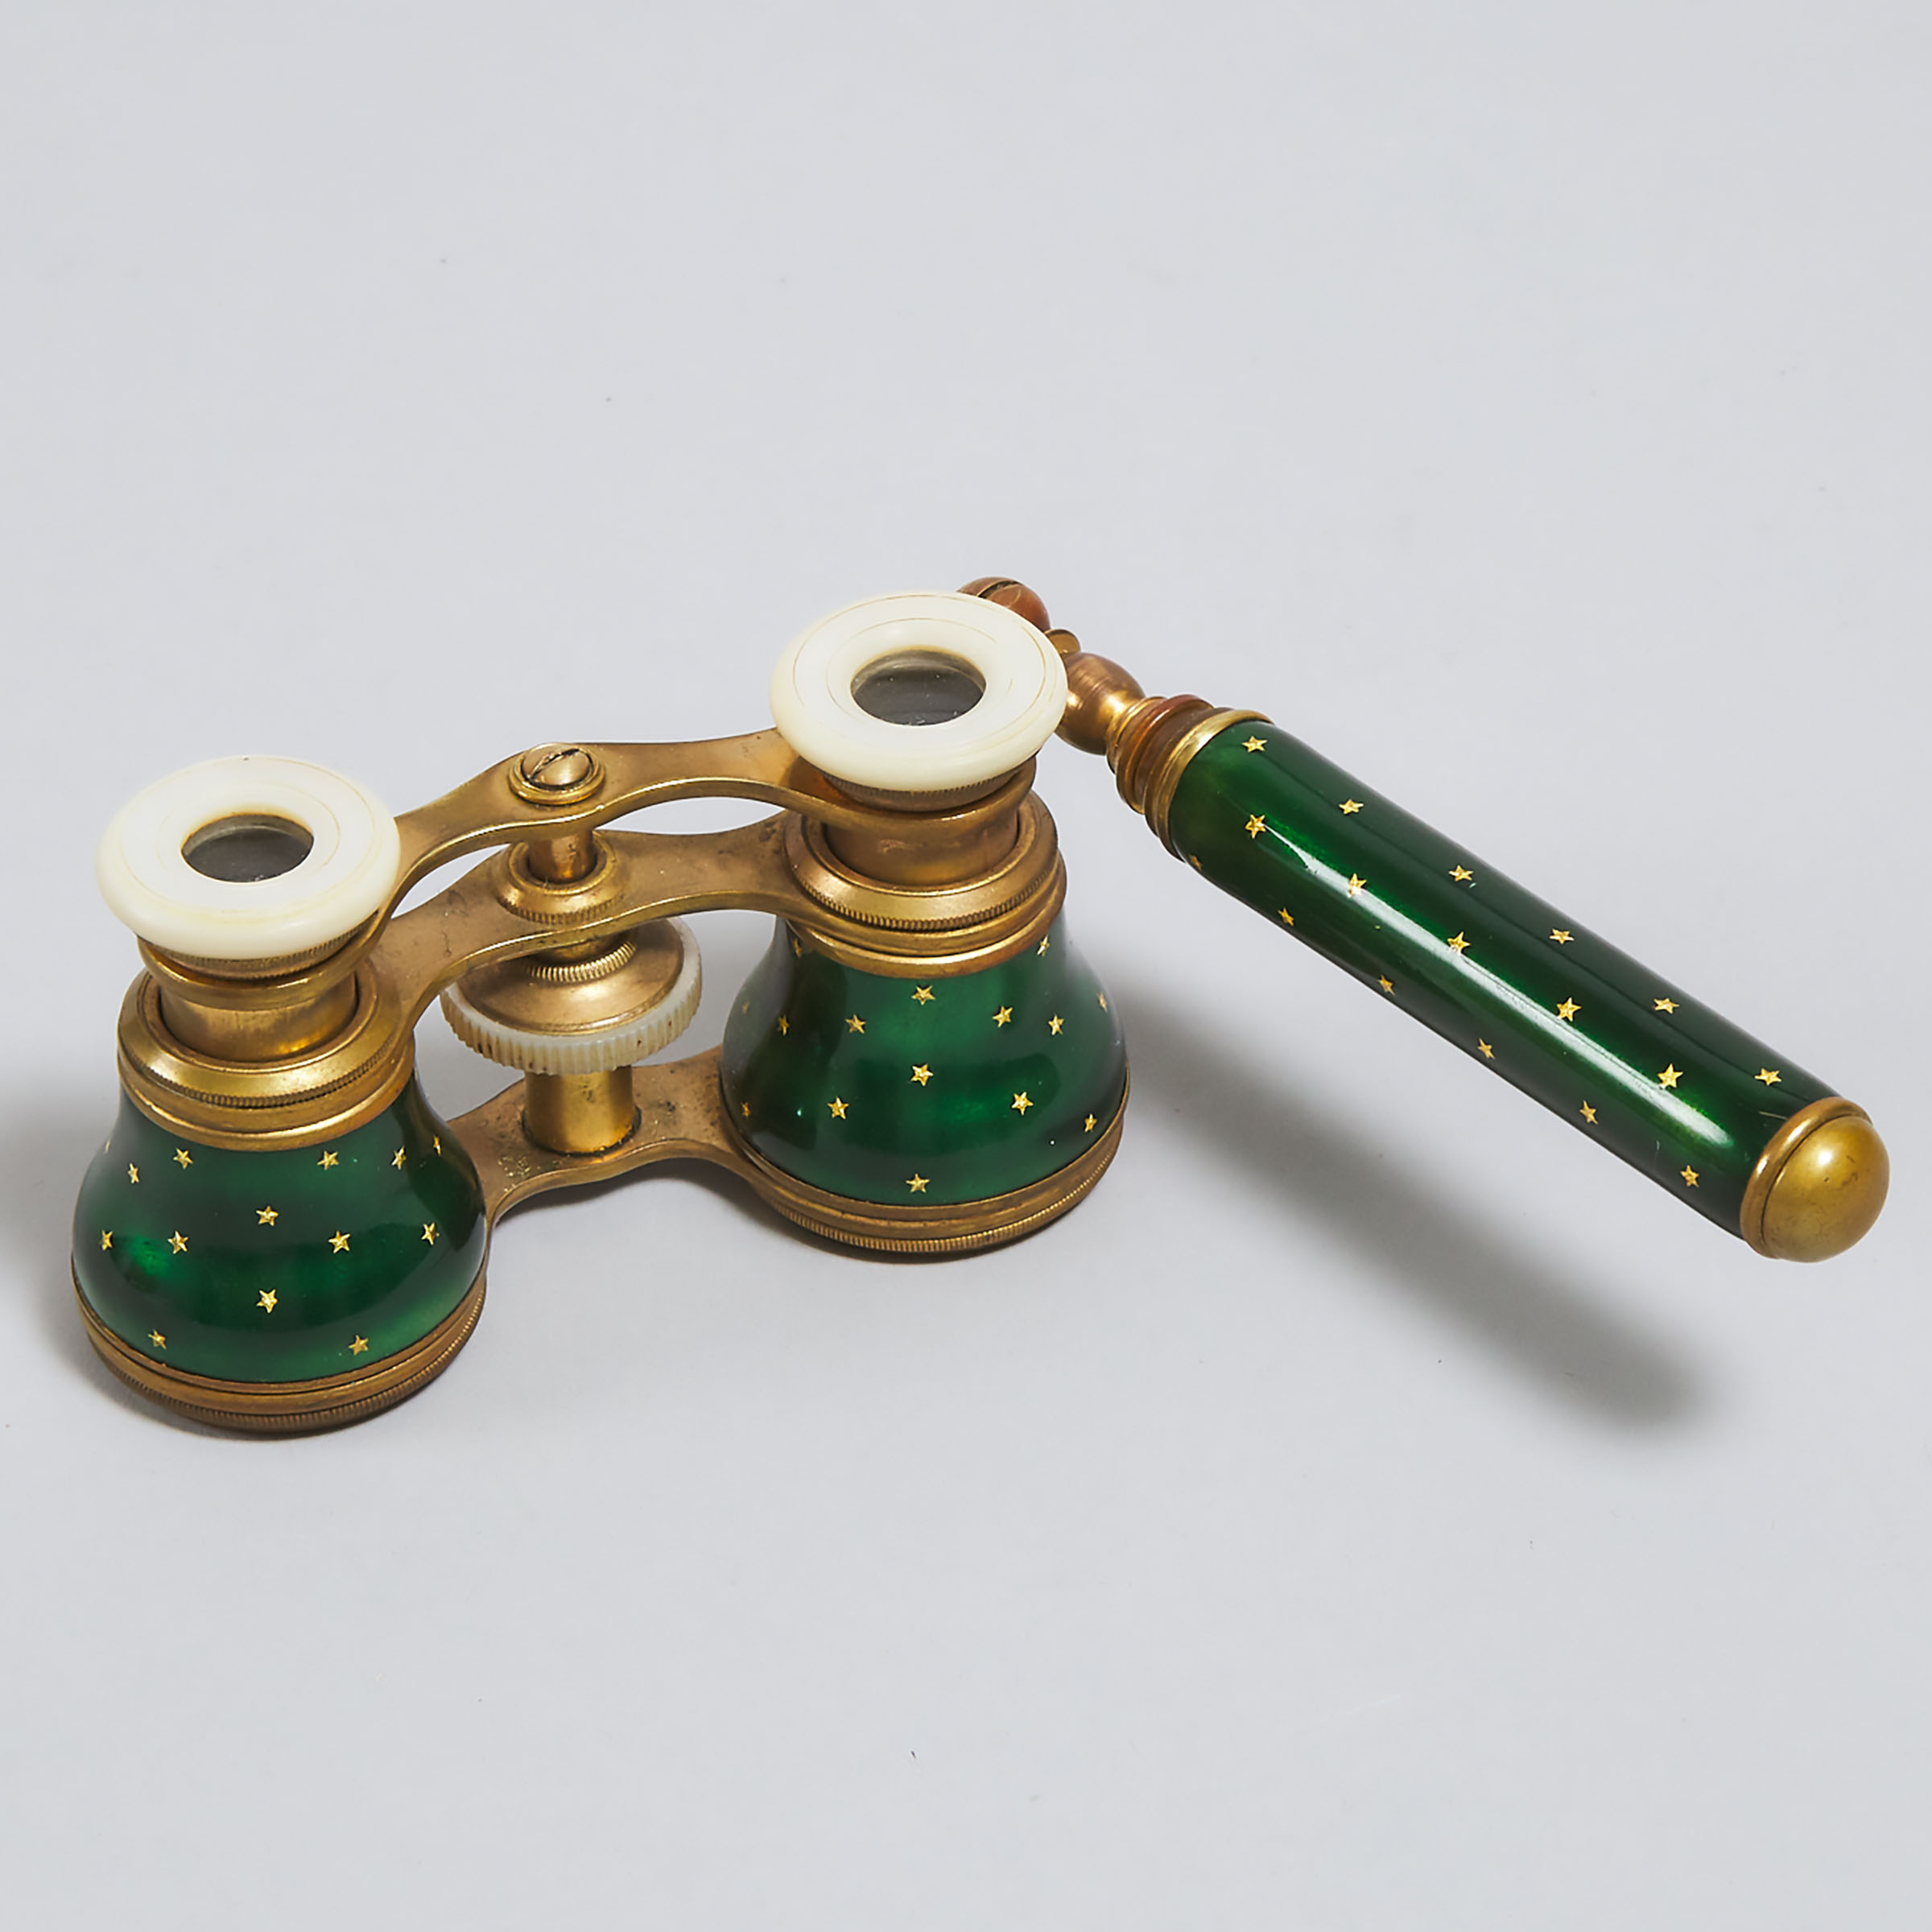 Pair of French Green Enamelled Opera Glasses, c.1900